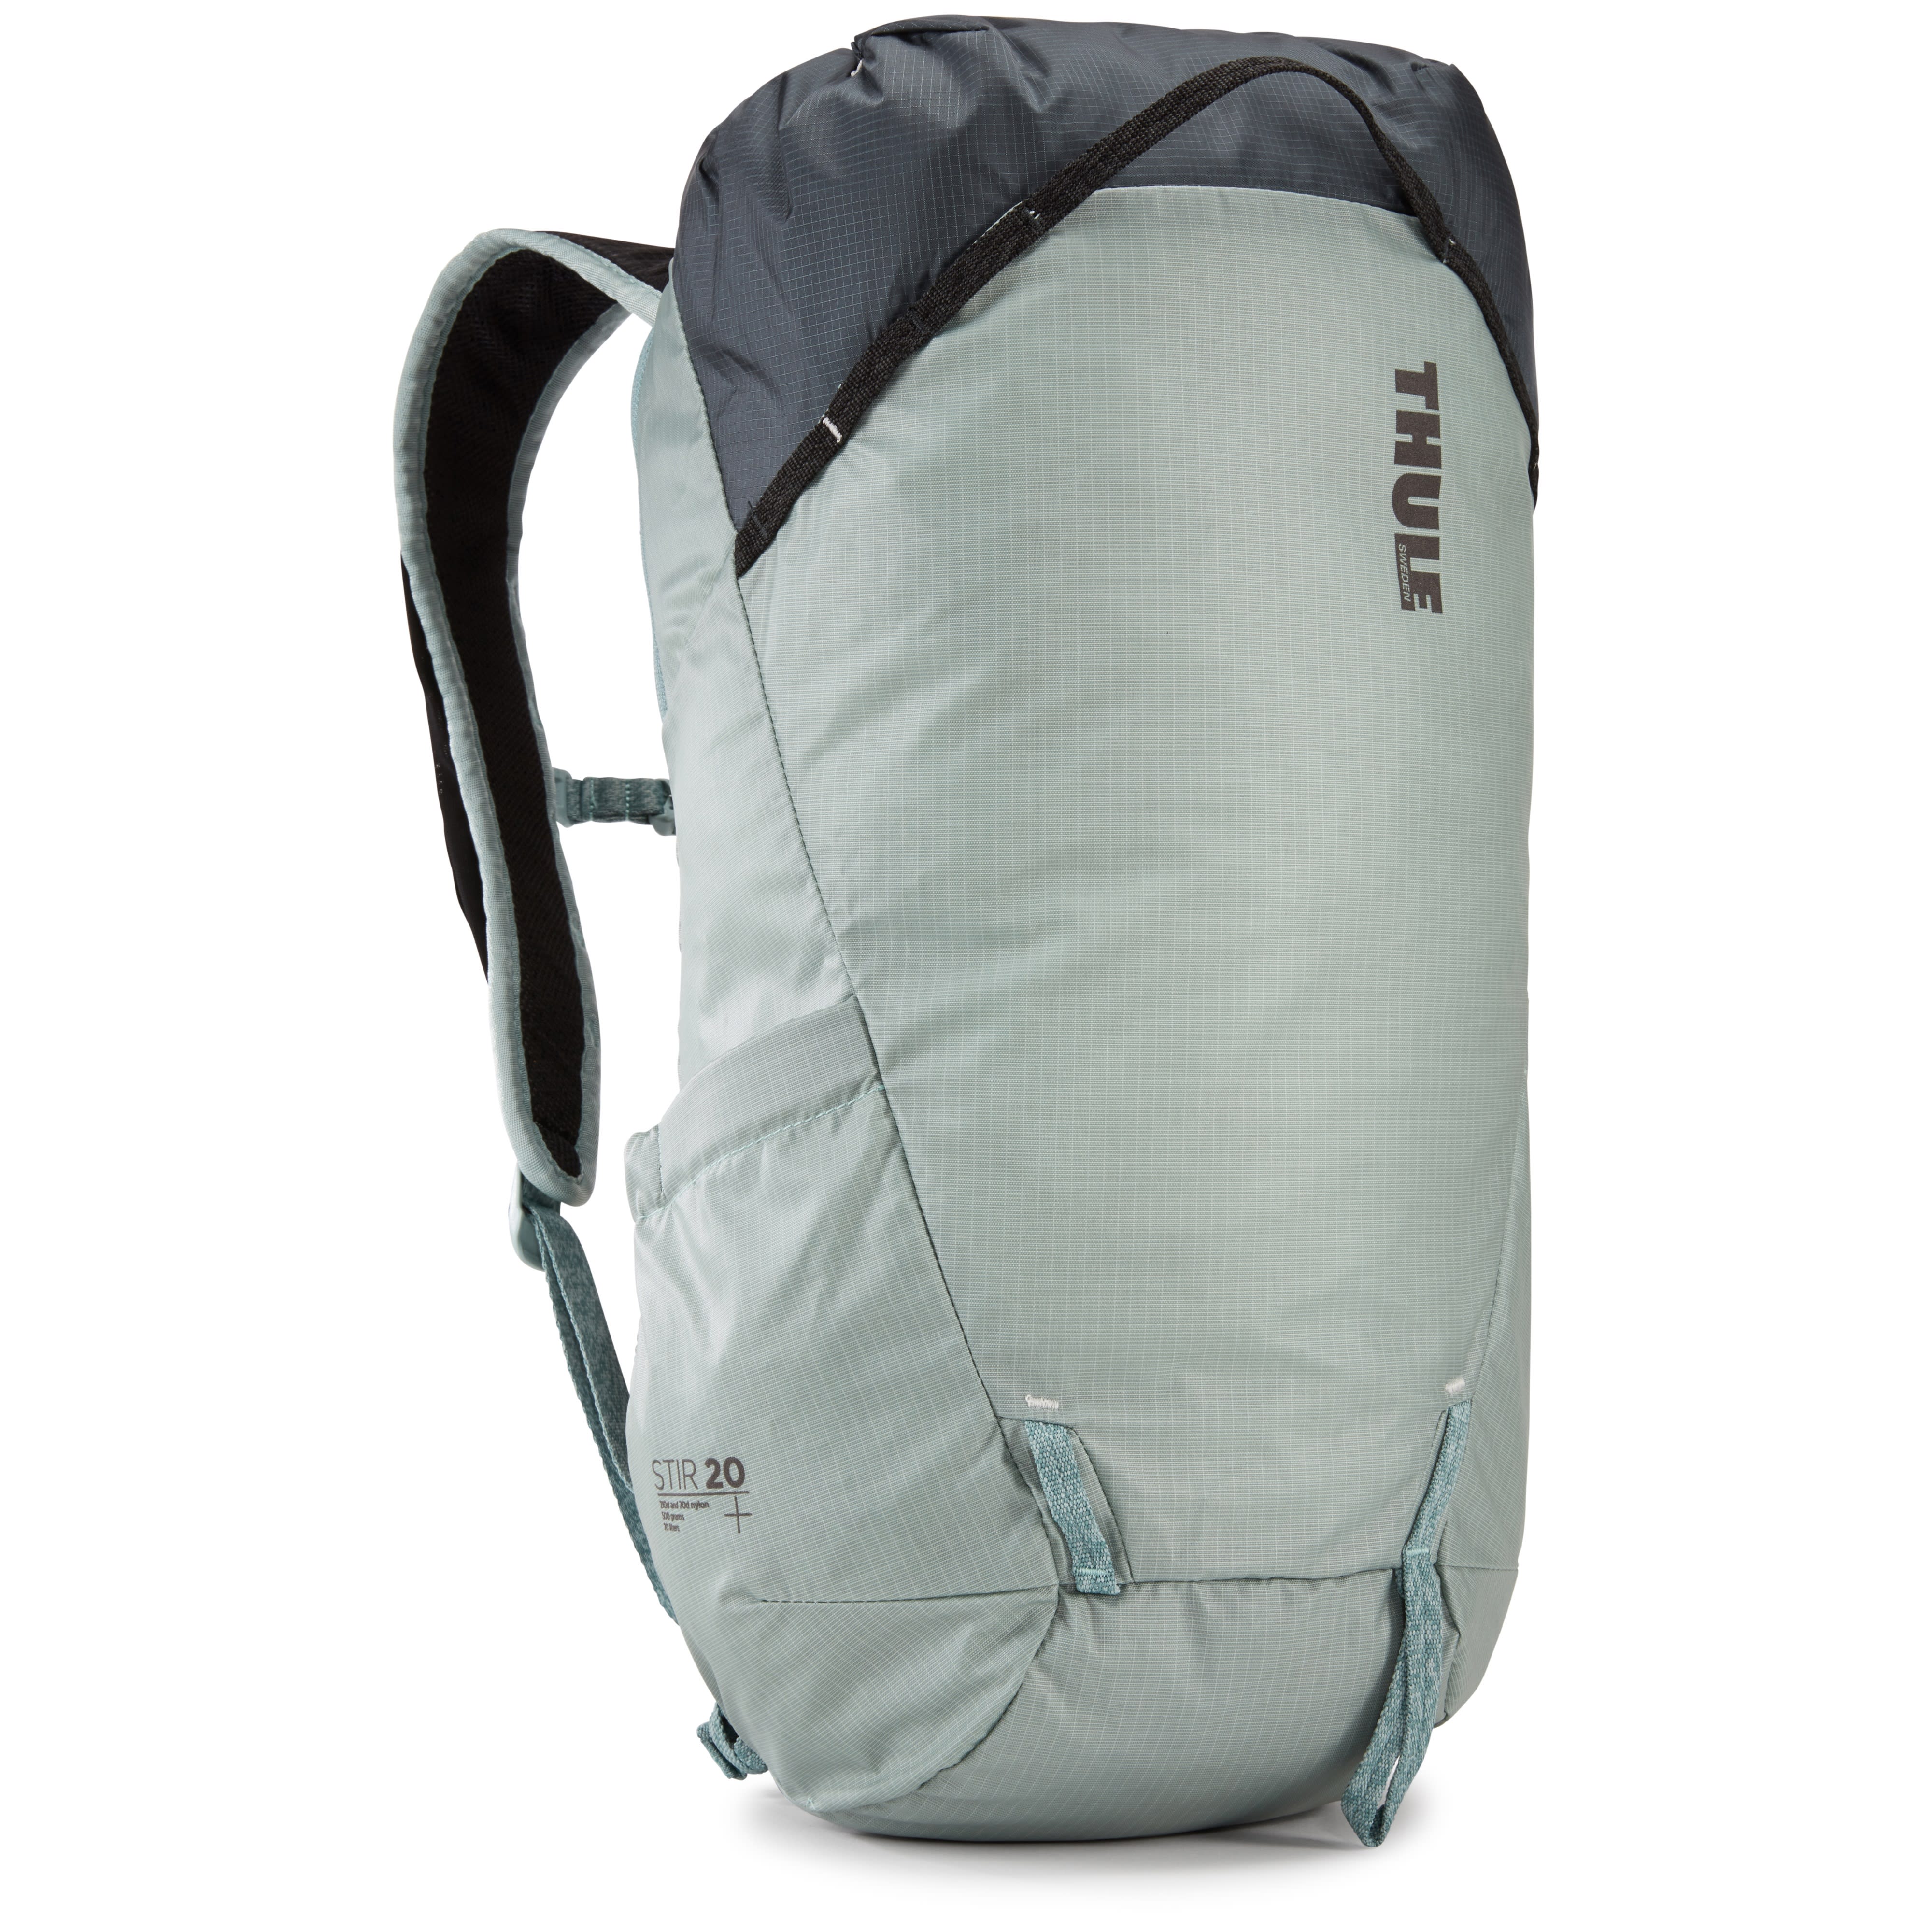 Buy Thule Stir 20L from Outnorth